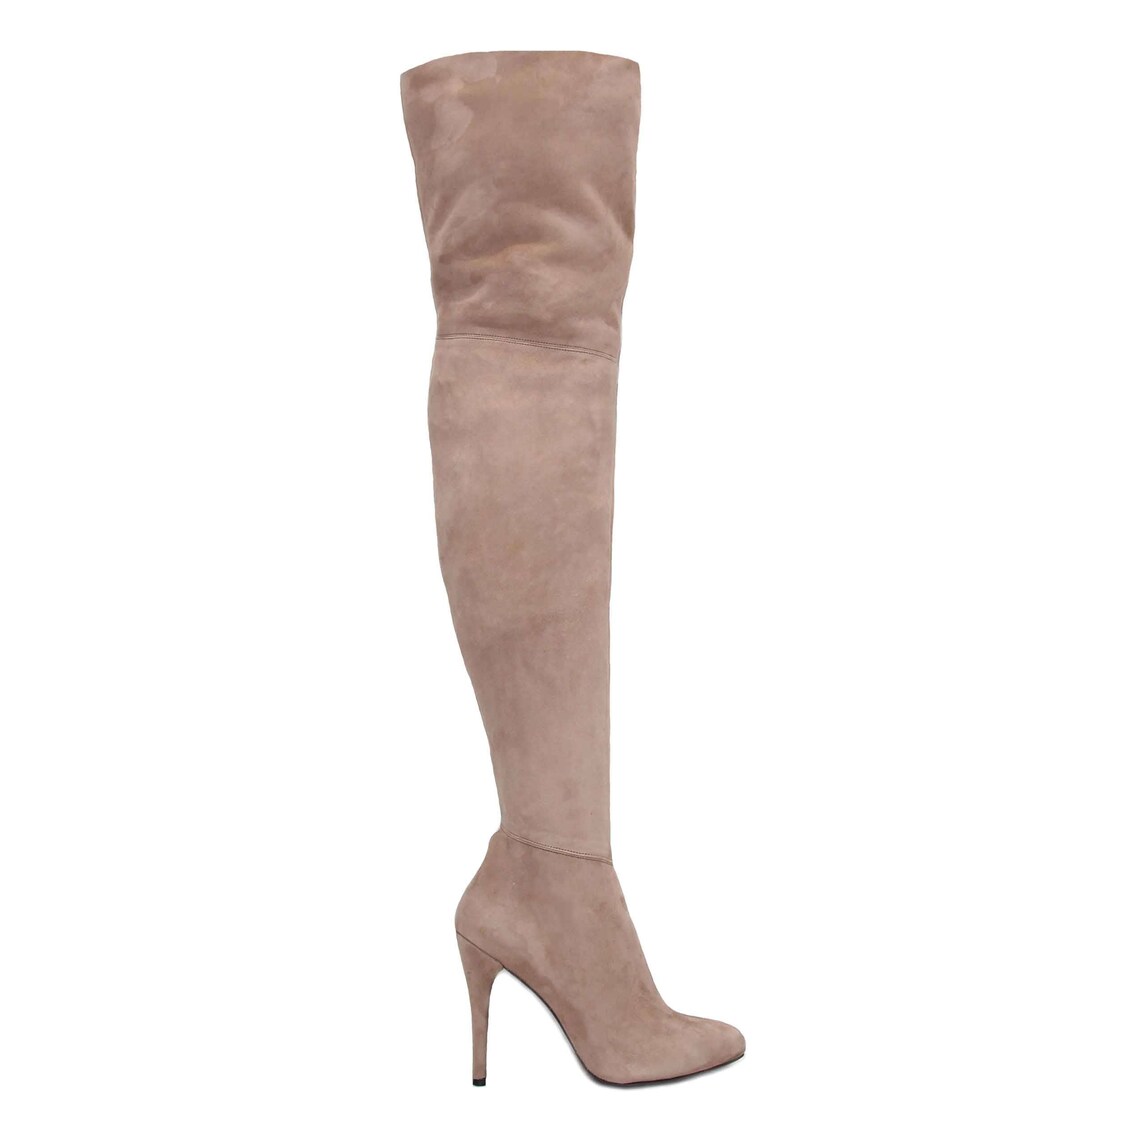 Edza Paris Beige Suede Leather High Heel Over the Knee Boots, Thigh ...